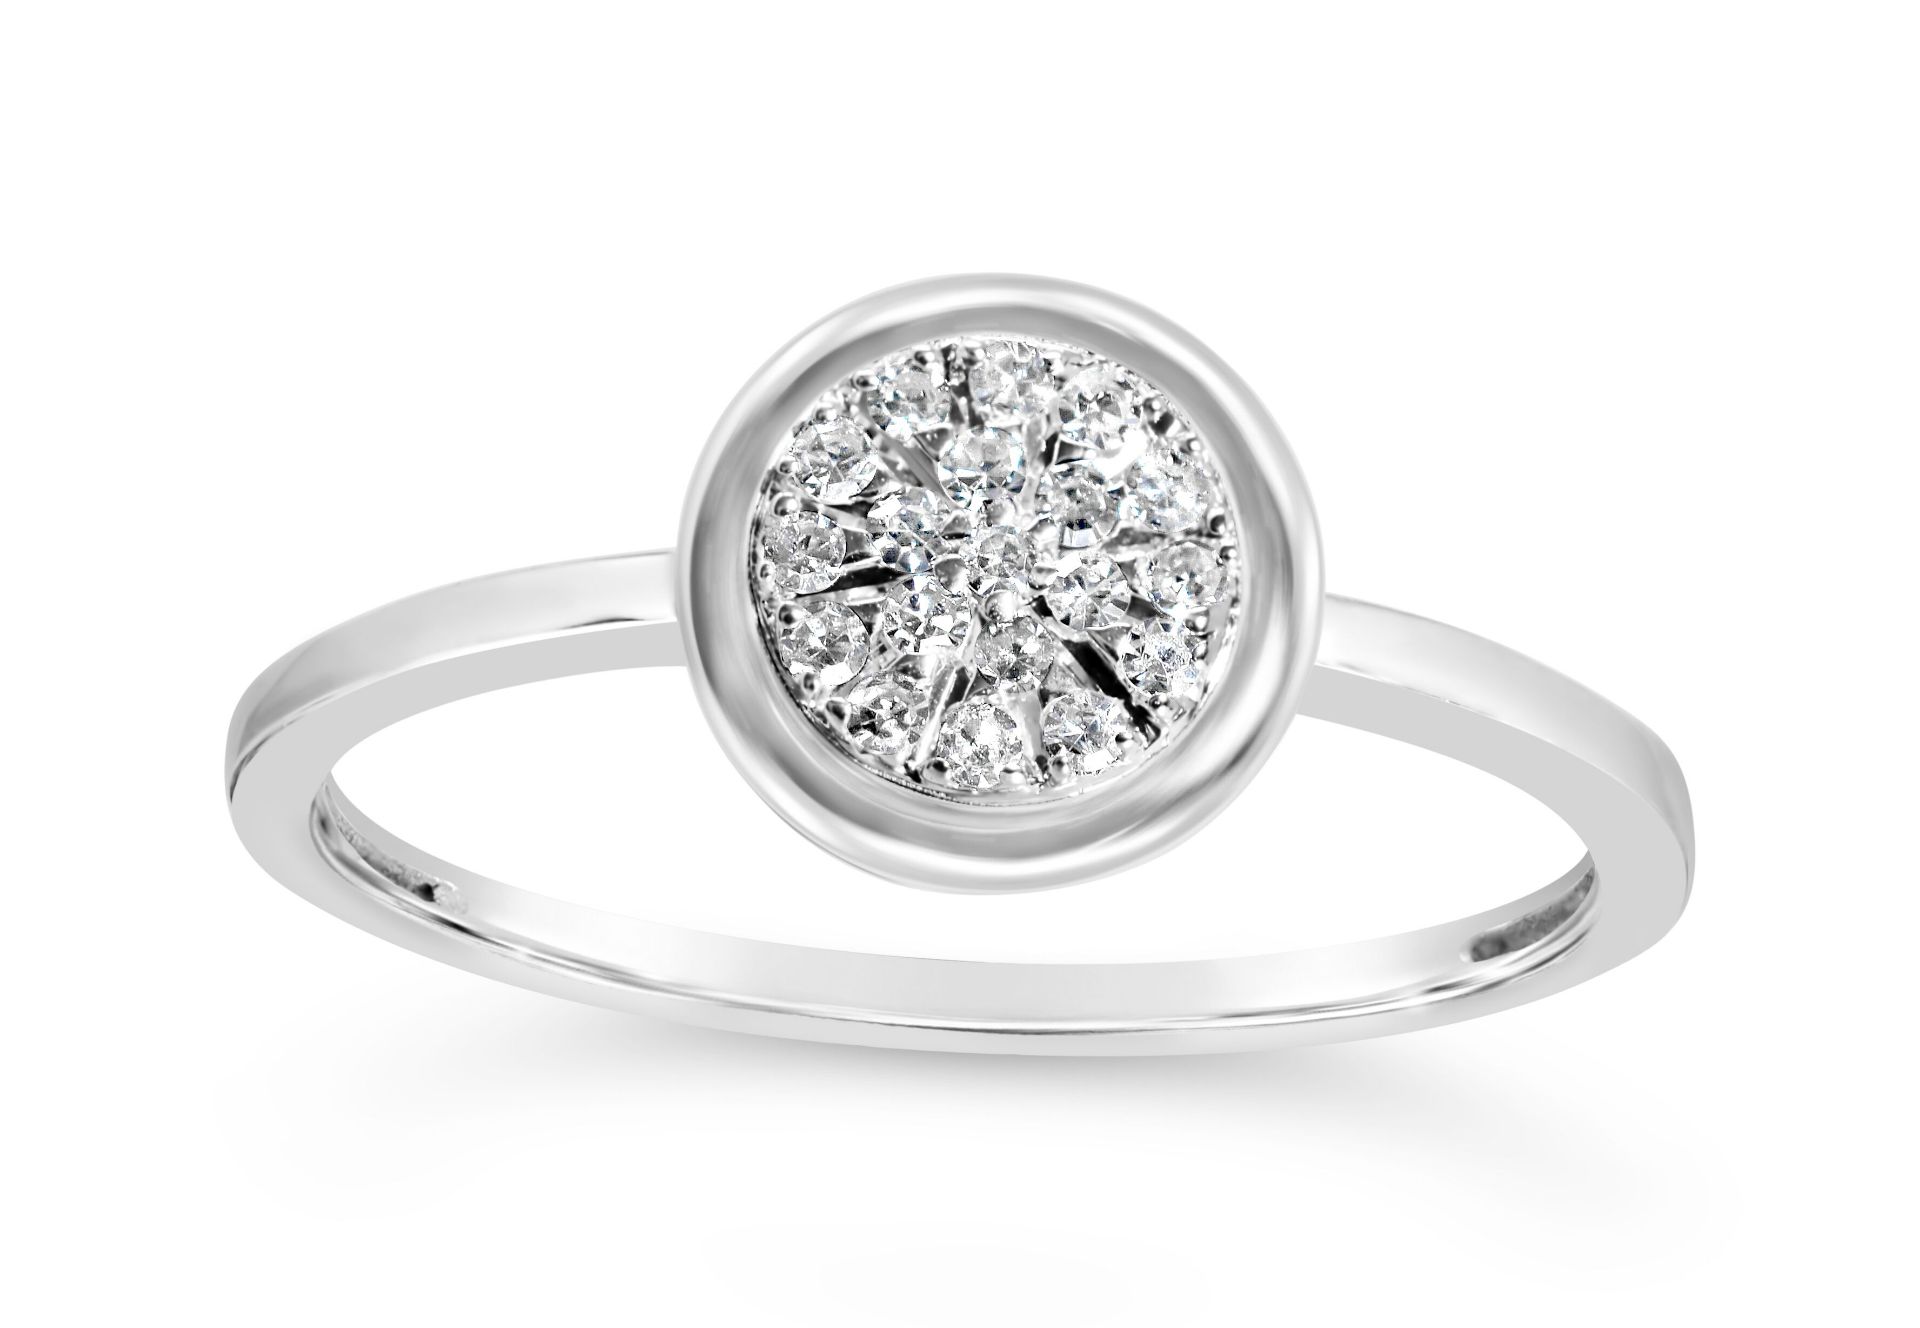 2 Carat Look Cluster Ring, 14ct White Gold ,RRP £699 Weight 1.7g, Diamond Weight 0.09ct, Colour H,